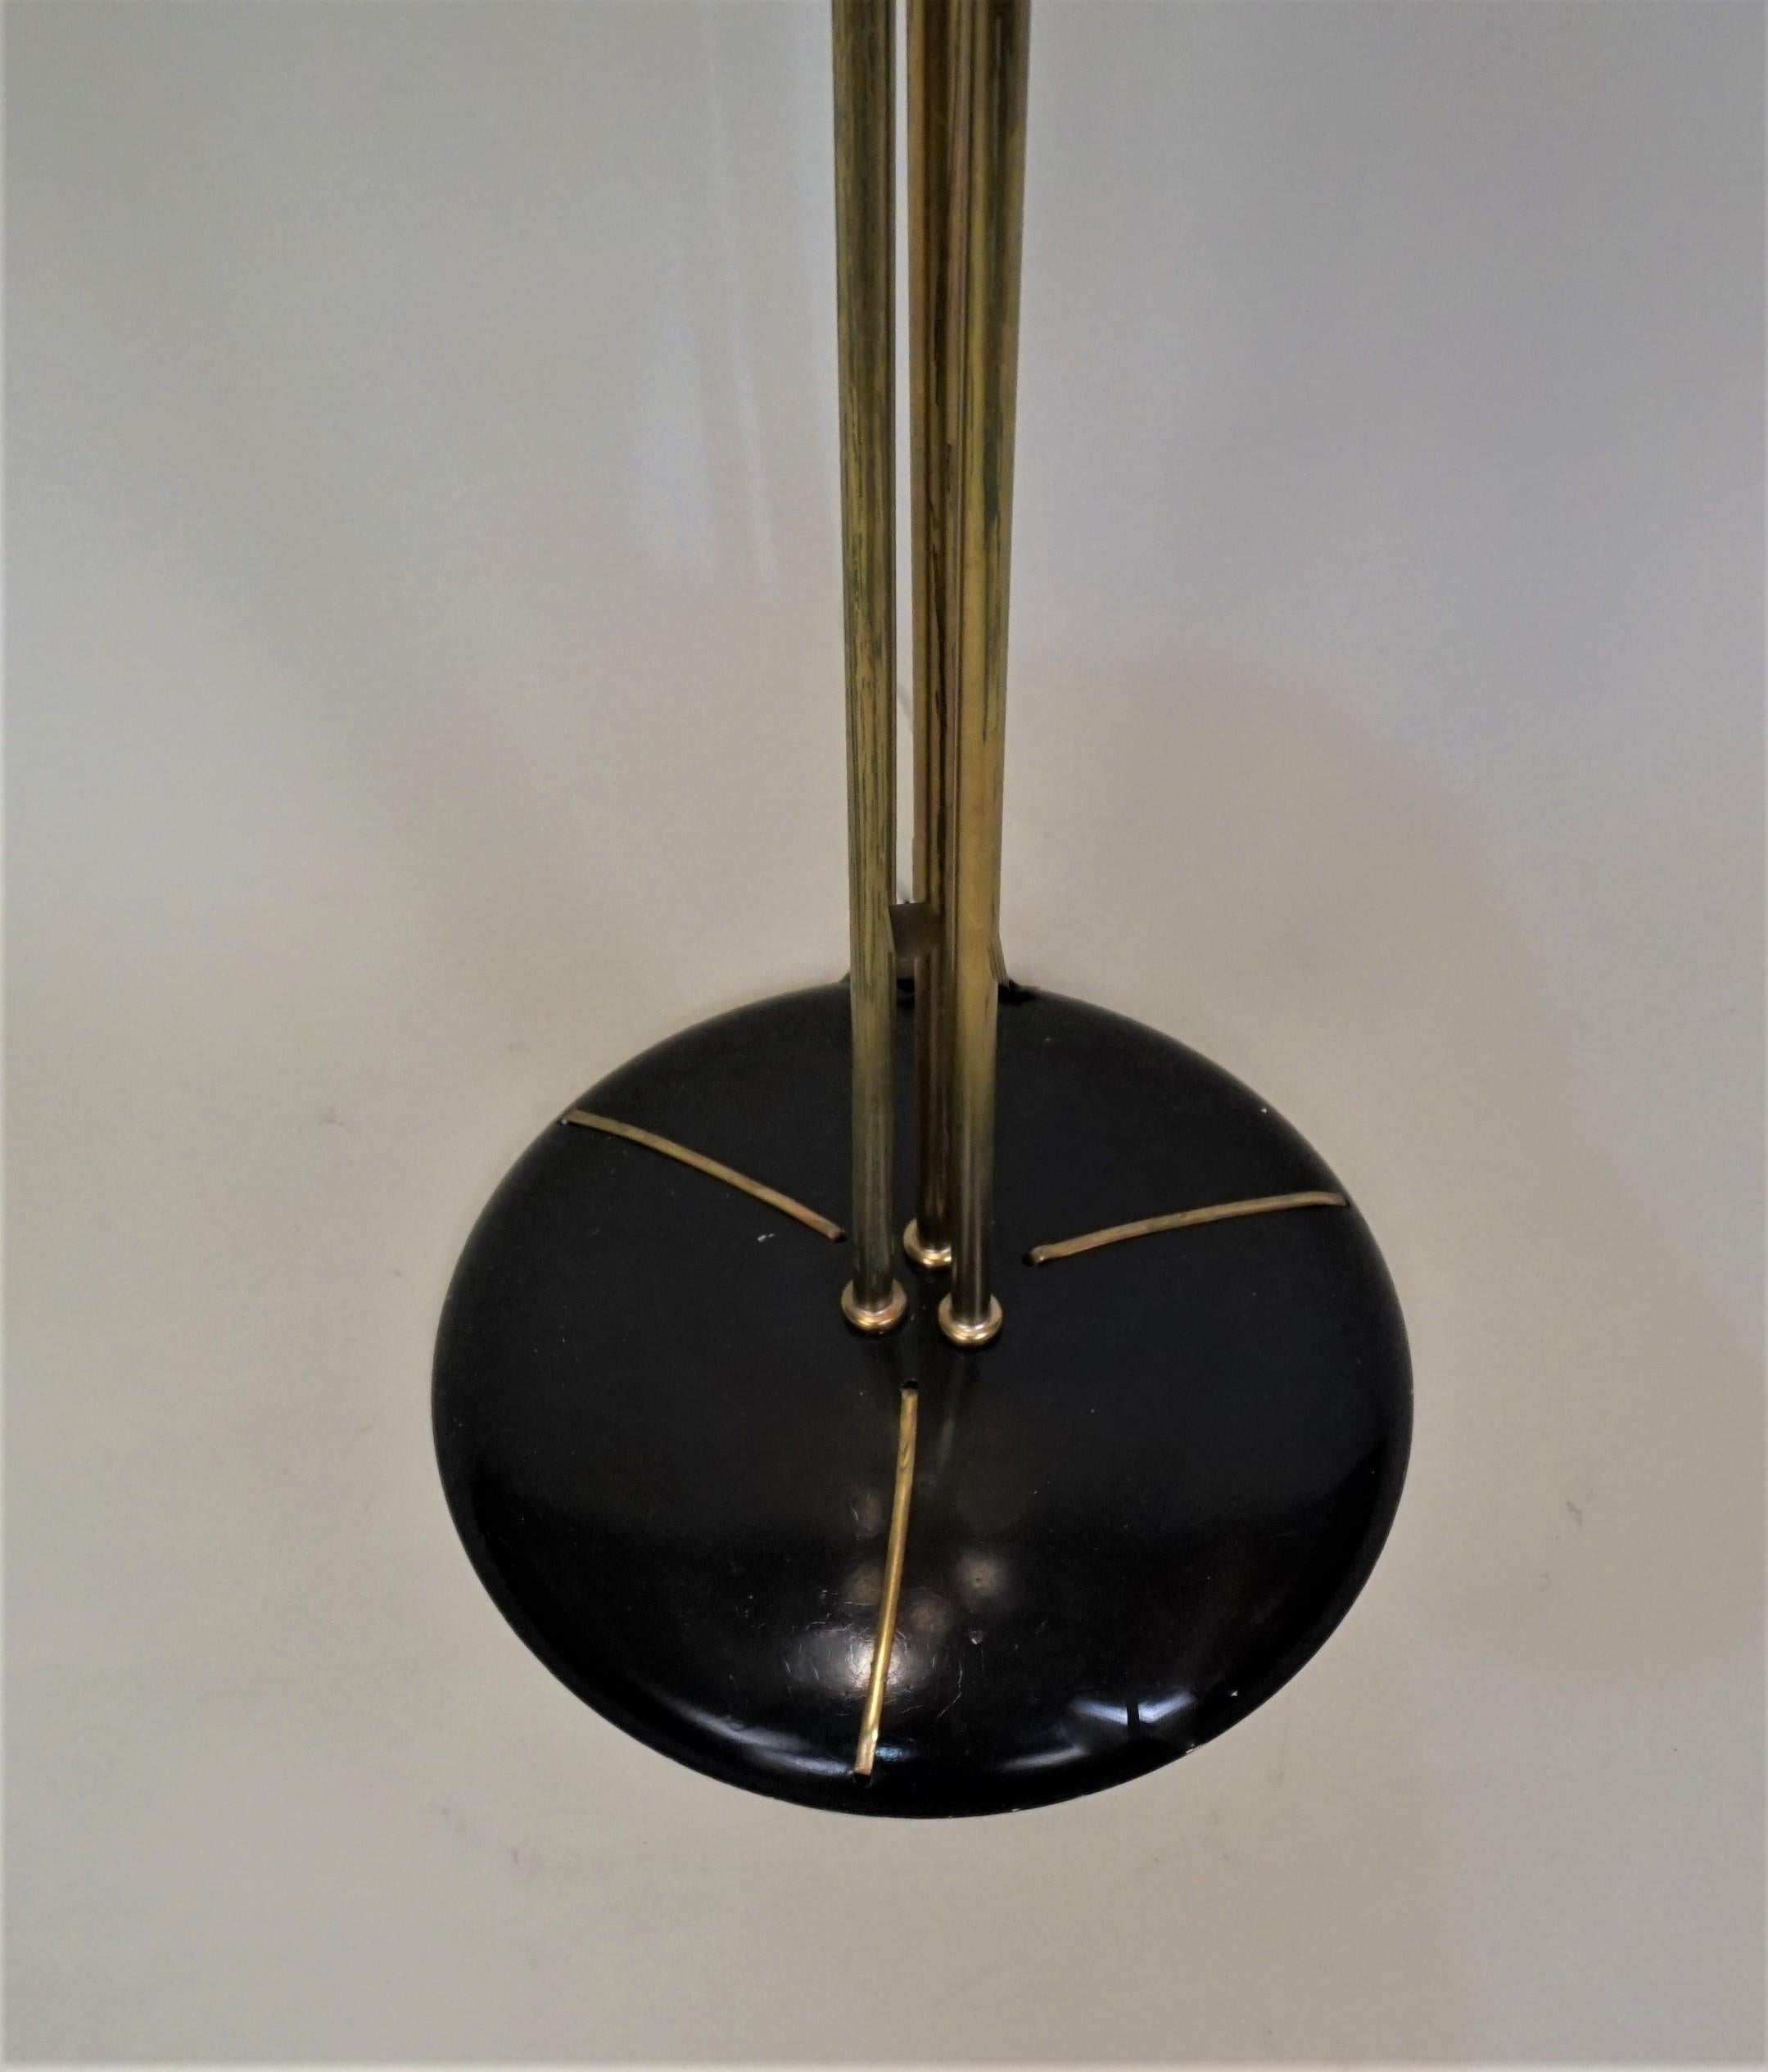 Lacquered Midcentury French Maison Arlus Floor Lamp